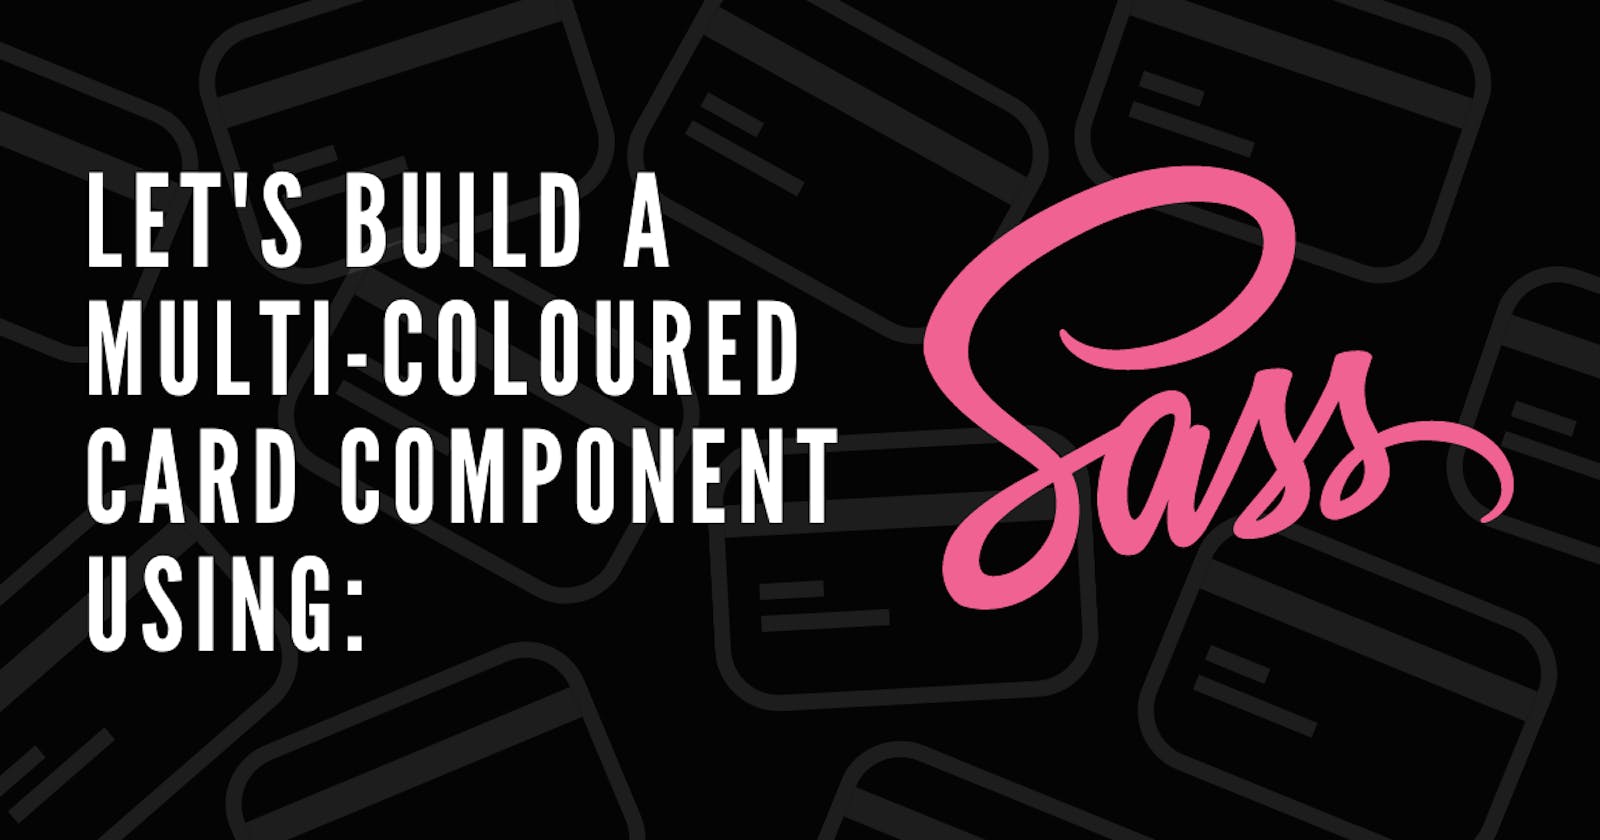 Let's build a Multi-coloured Card Component using Sass/SCSS